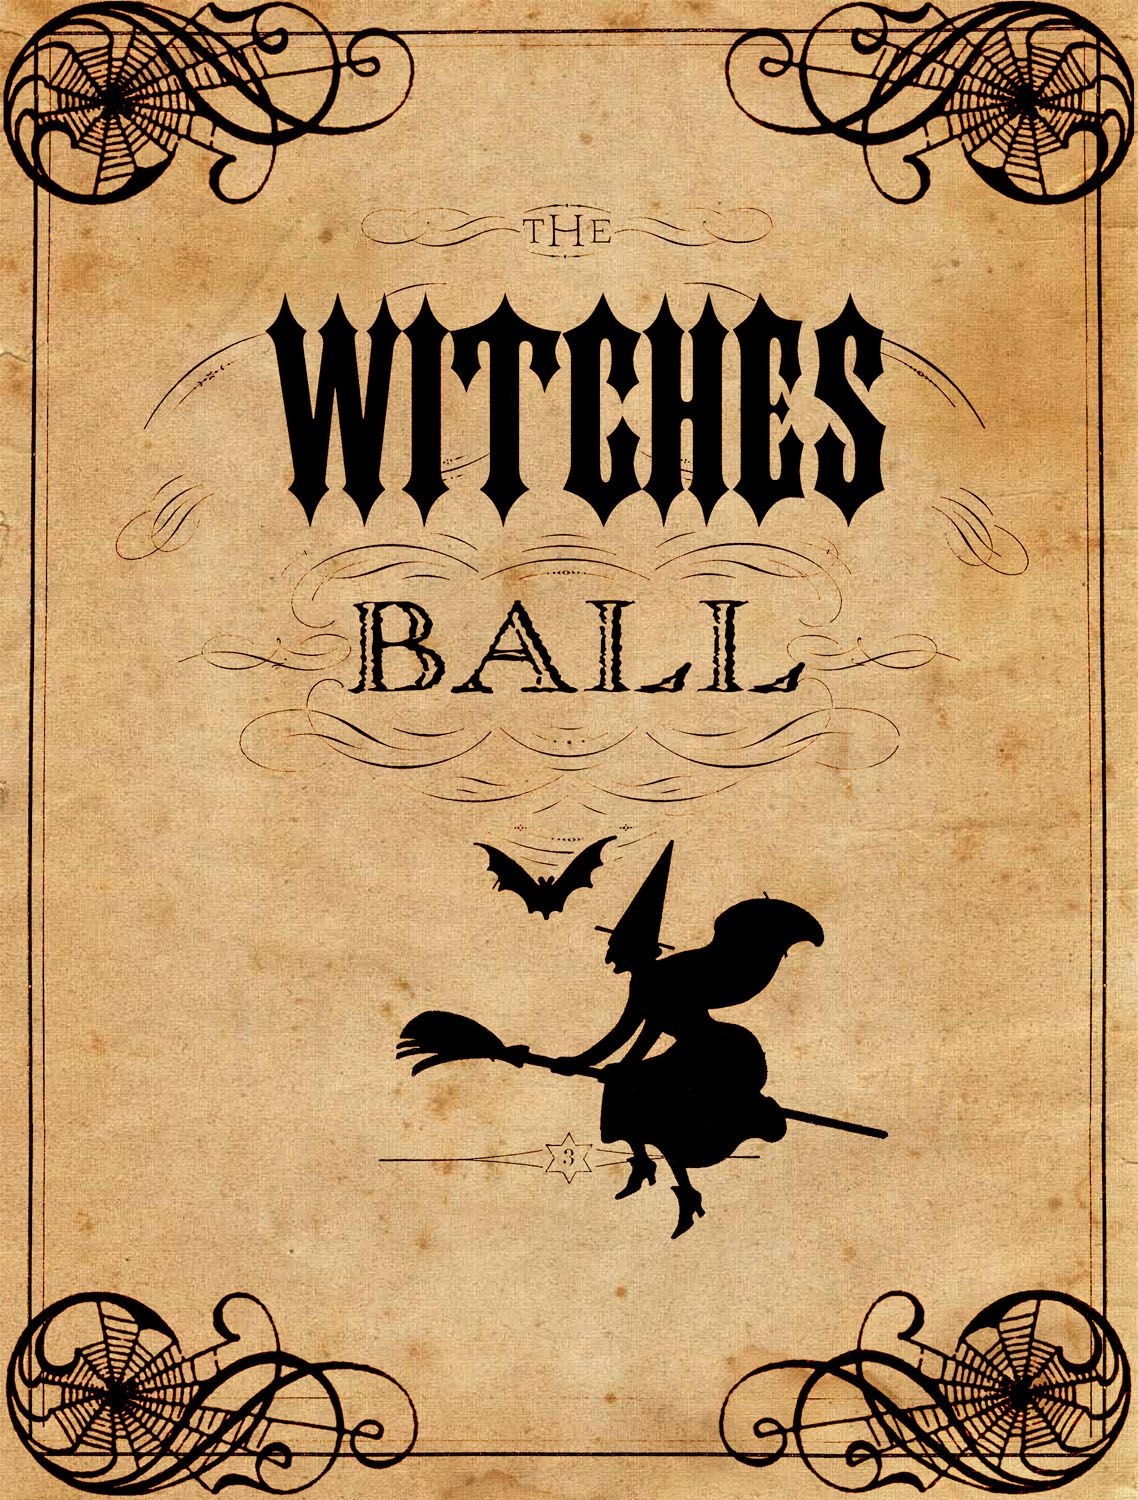 Vintage Halloween Printable - The Witches Ball | Halloween - Free Printable Vintage Halloween Images